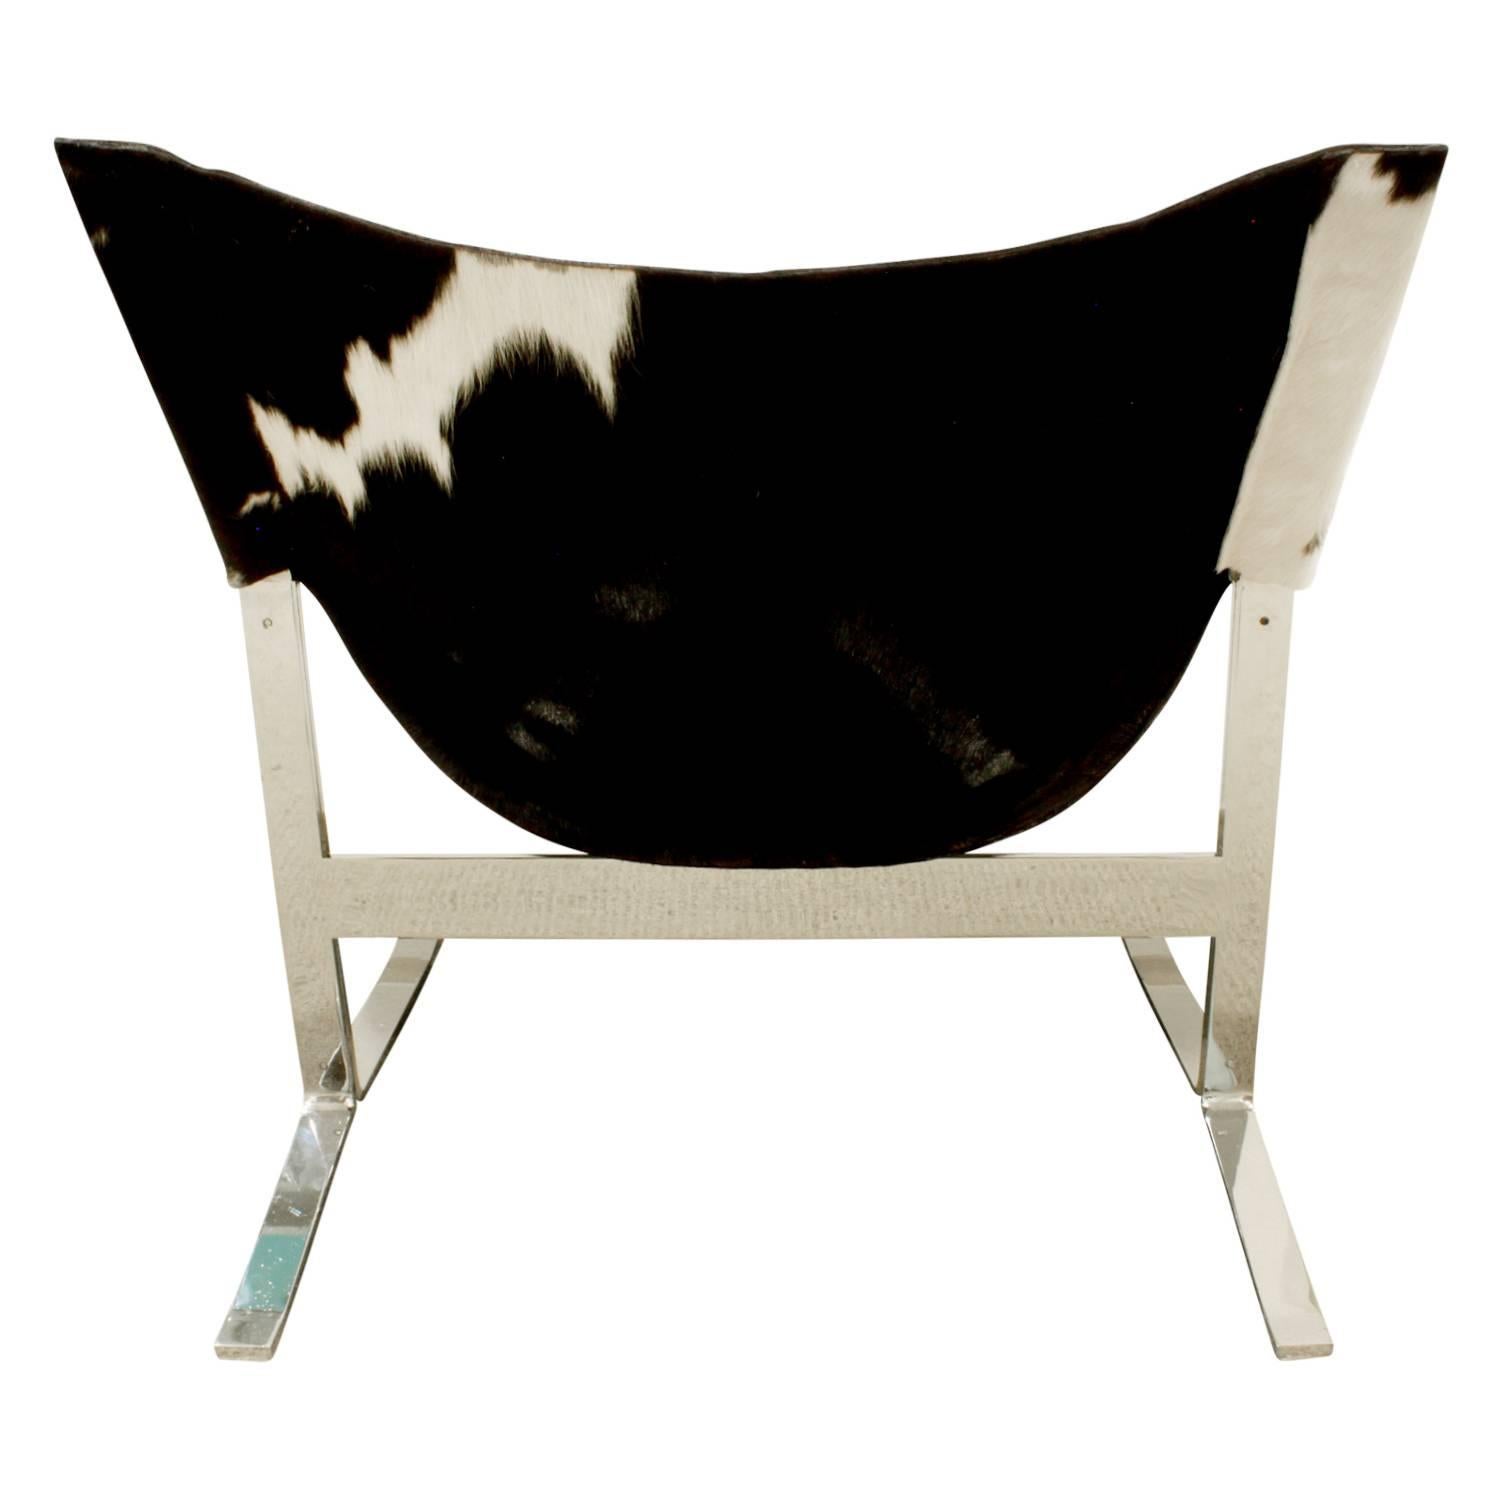 Hand-Crafted Chic Pair of Sling Chairs in Steel with Cow Hides, 1963